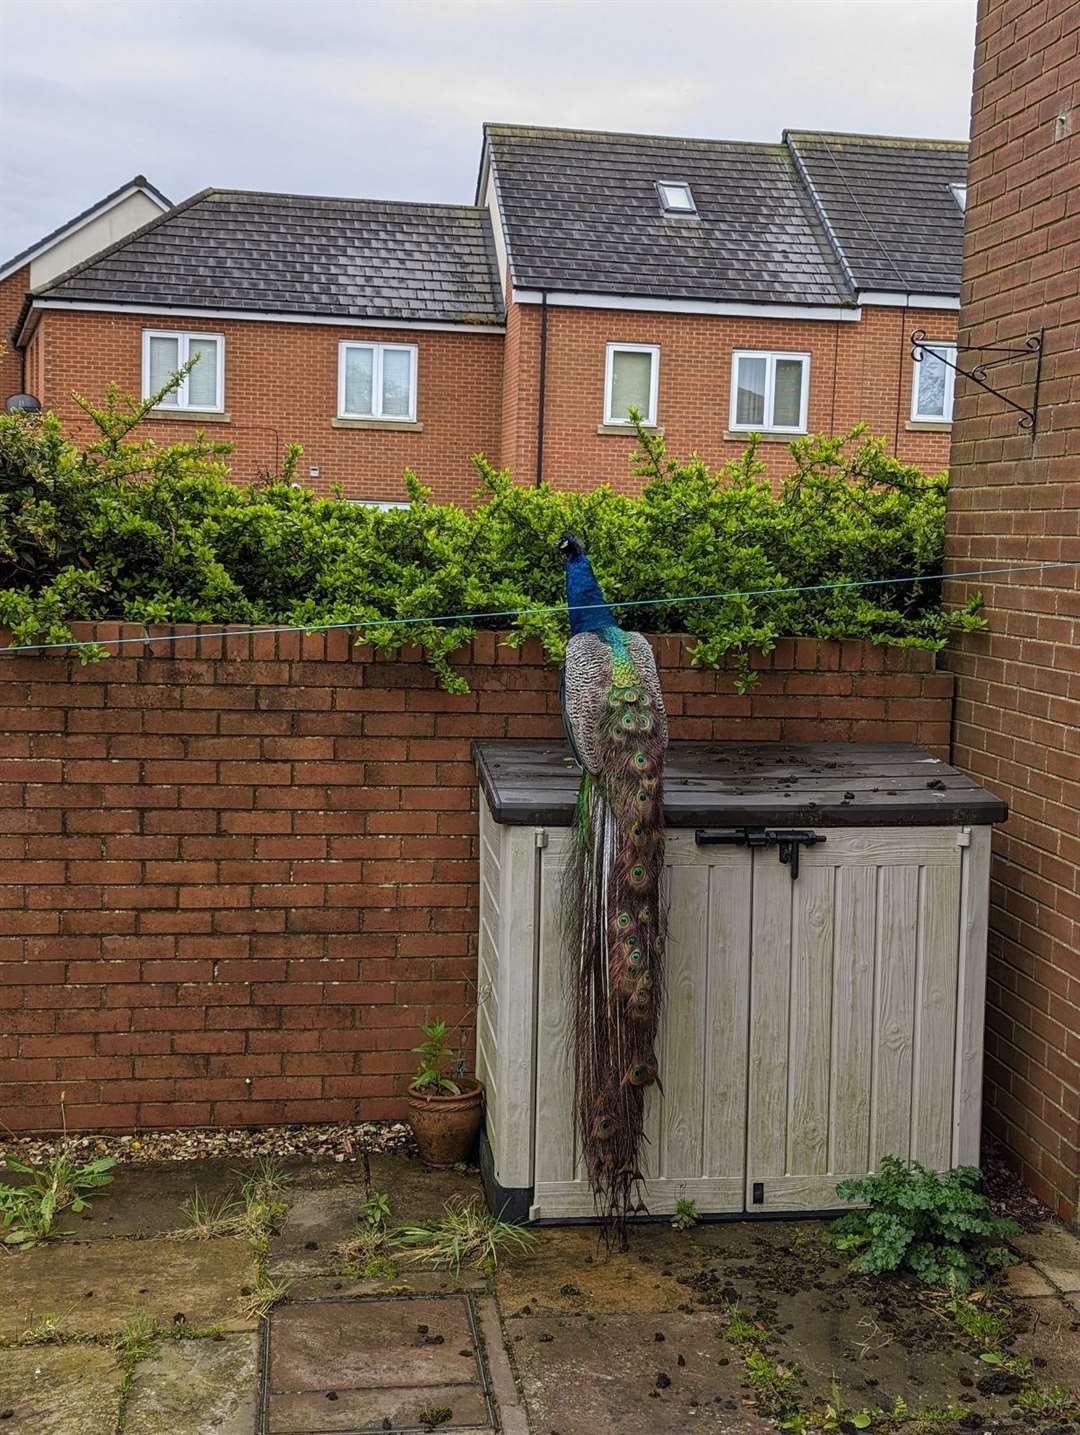 The peacock fell off a roof on May 6 after being spooked (RSPCA/PA)